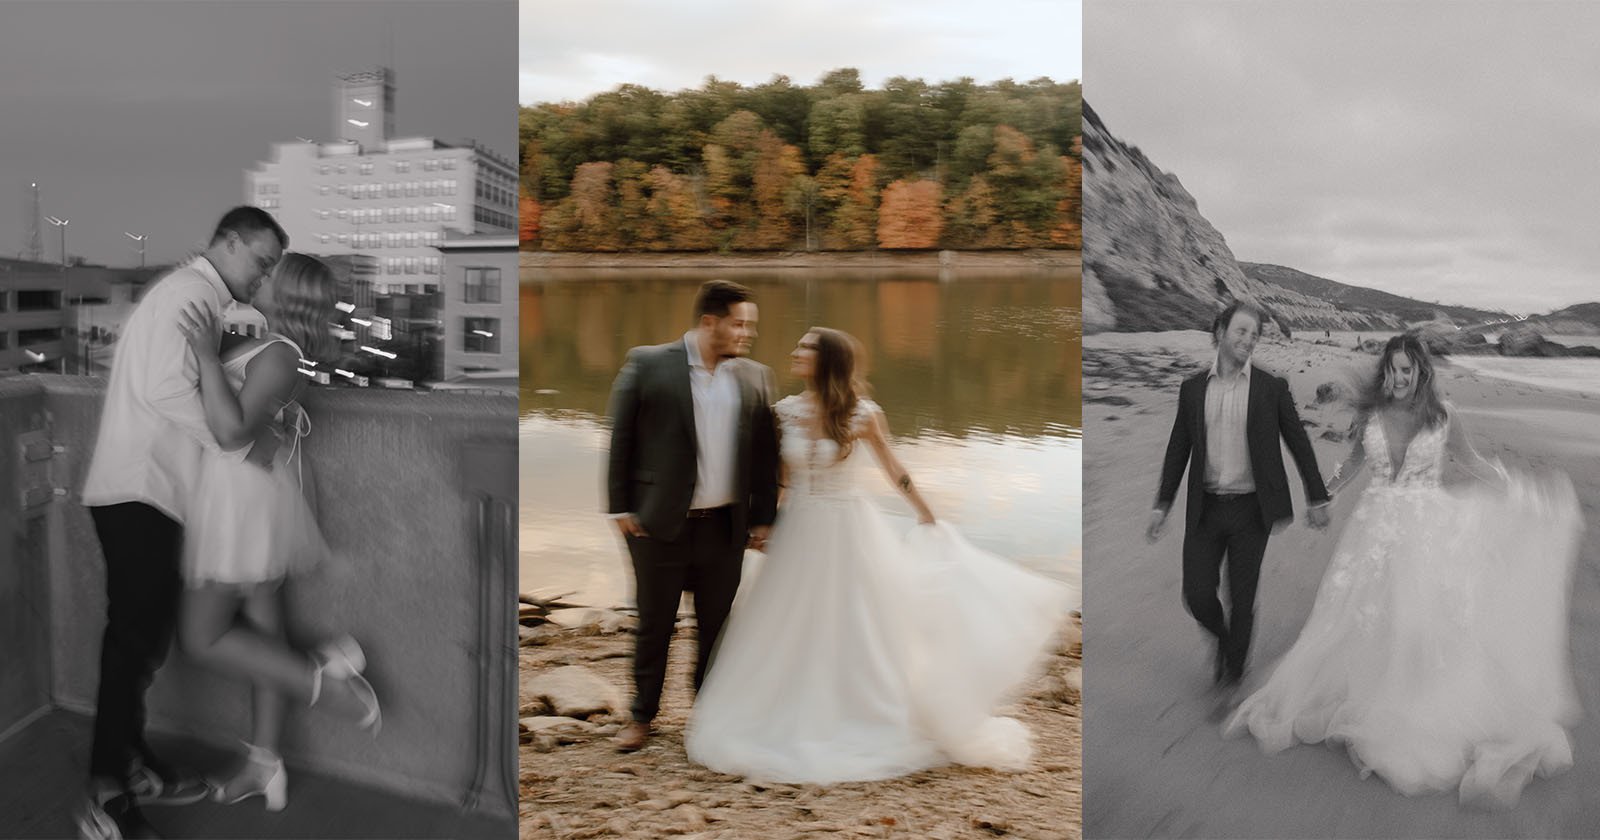  wedding photographer says more clients are requesting blurry 